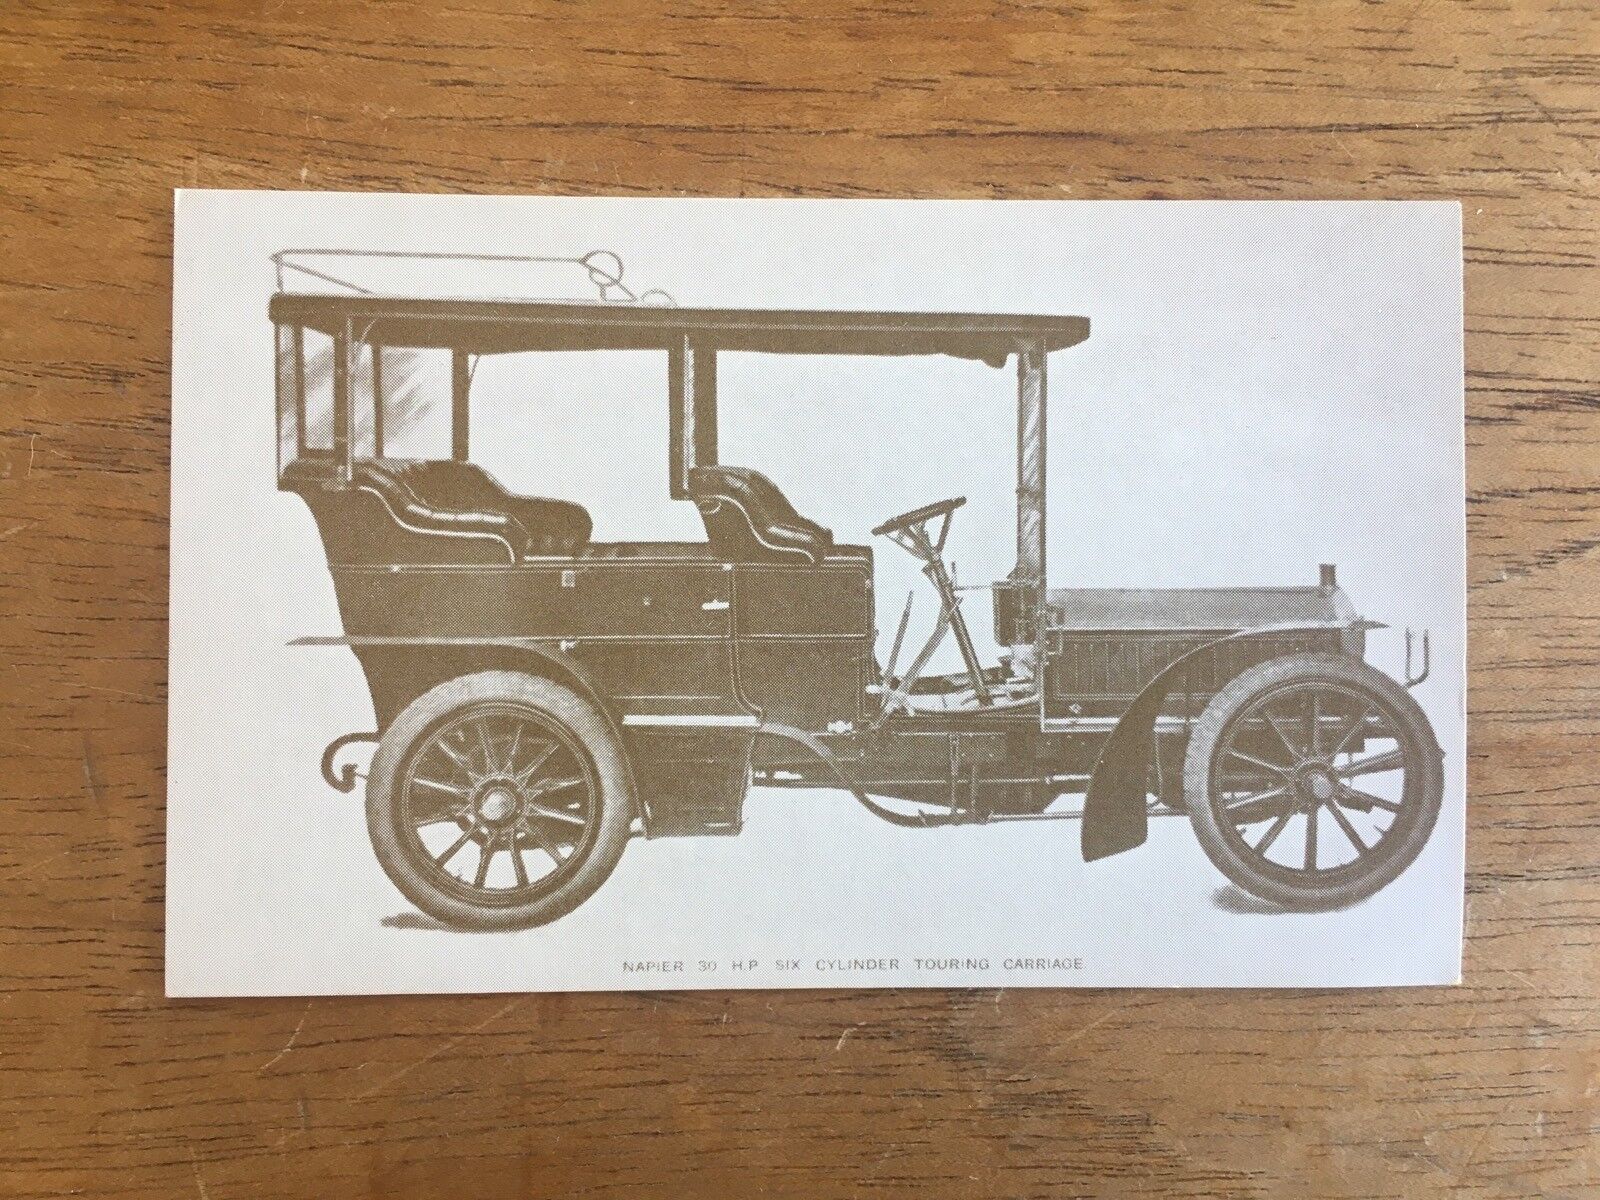 VINTAGE 1915 NAPIER 50HP 6 CYL TOURING CARRIAGE PHOTO CAR POST CARD